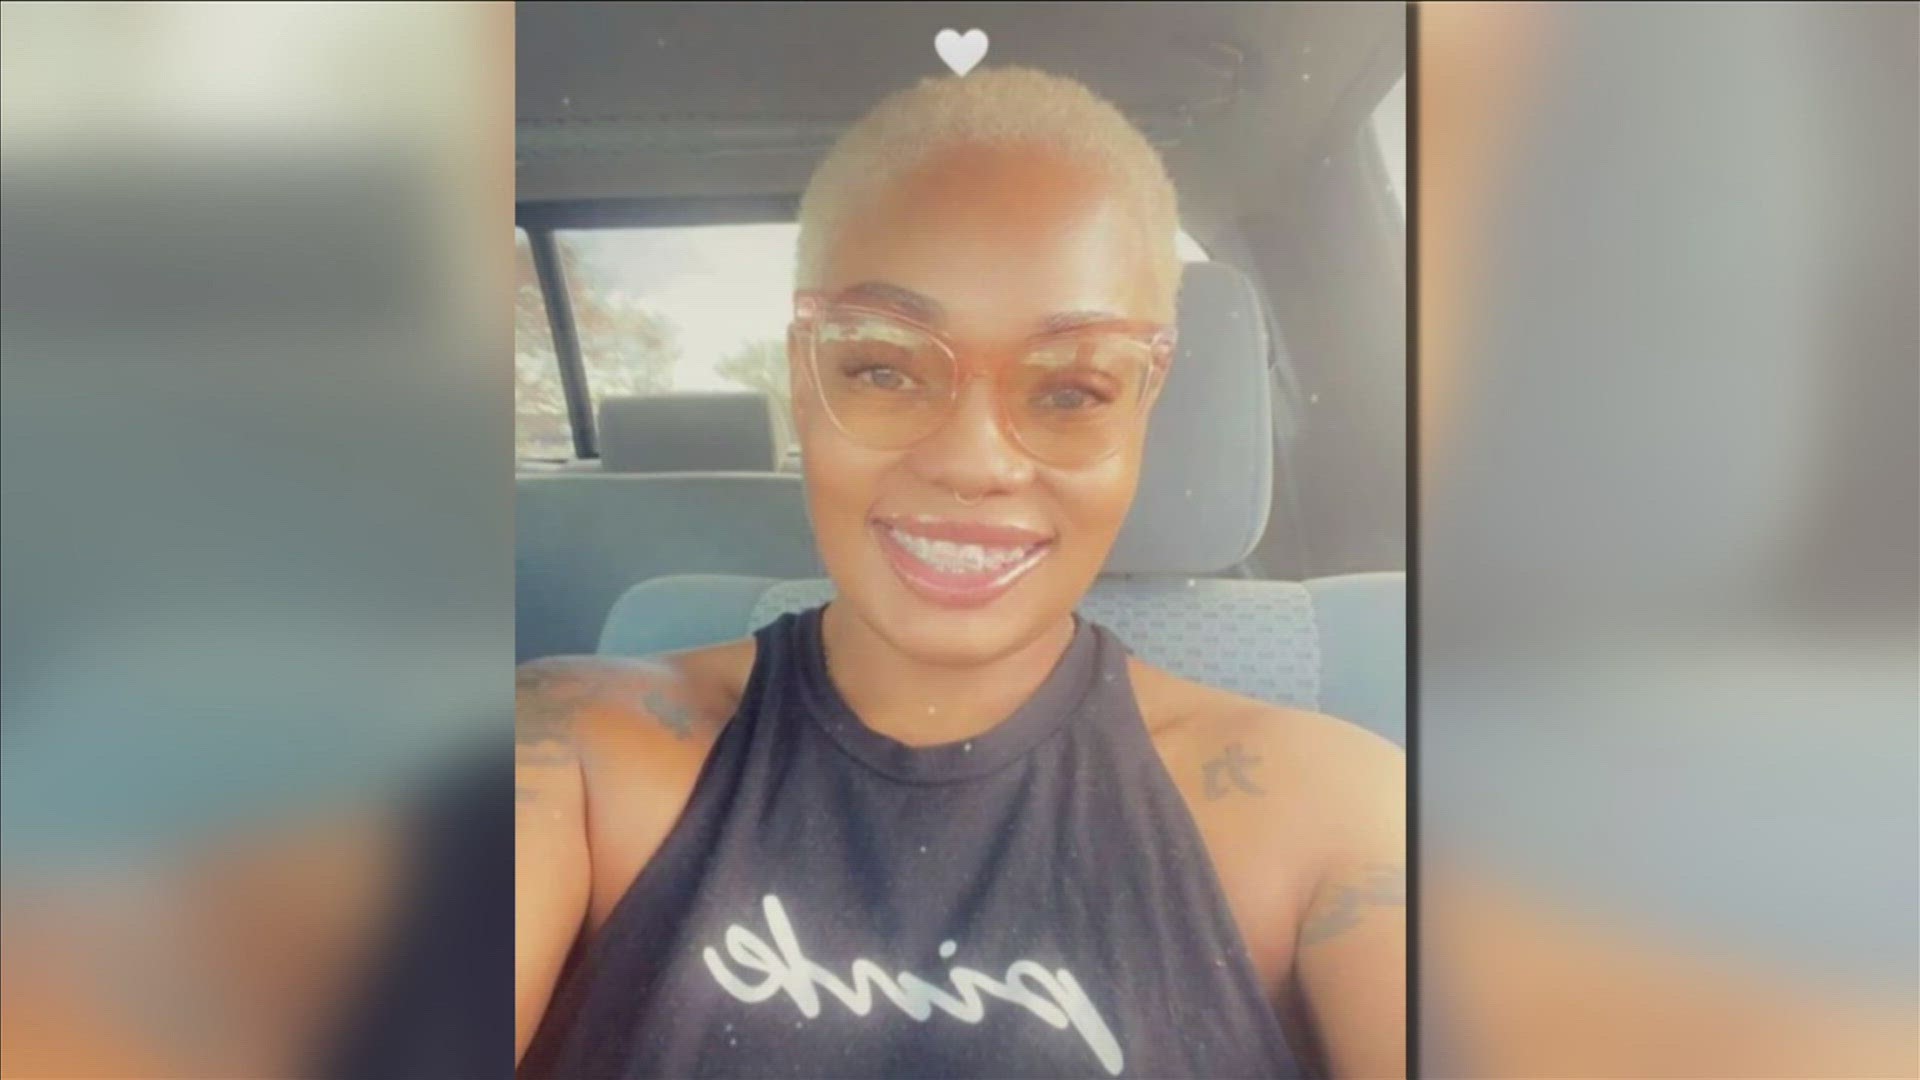 Southaven Police said 36-year-old Bonita Adams was last seen at a gas station on Stateline Road. She's been missing for more than two weeks.